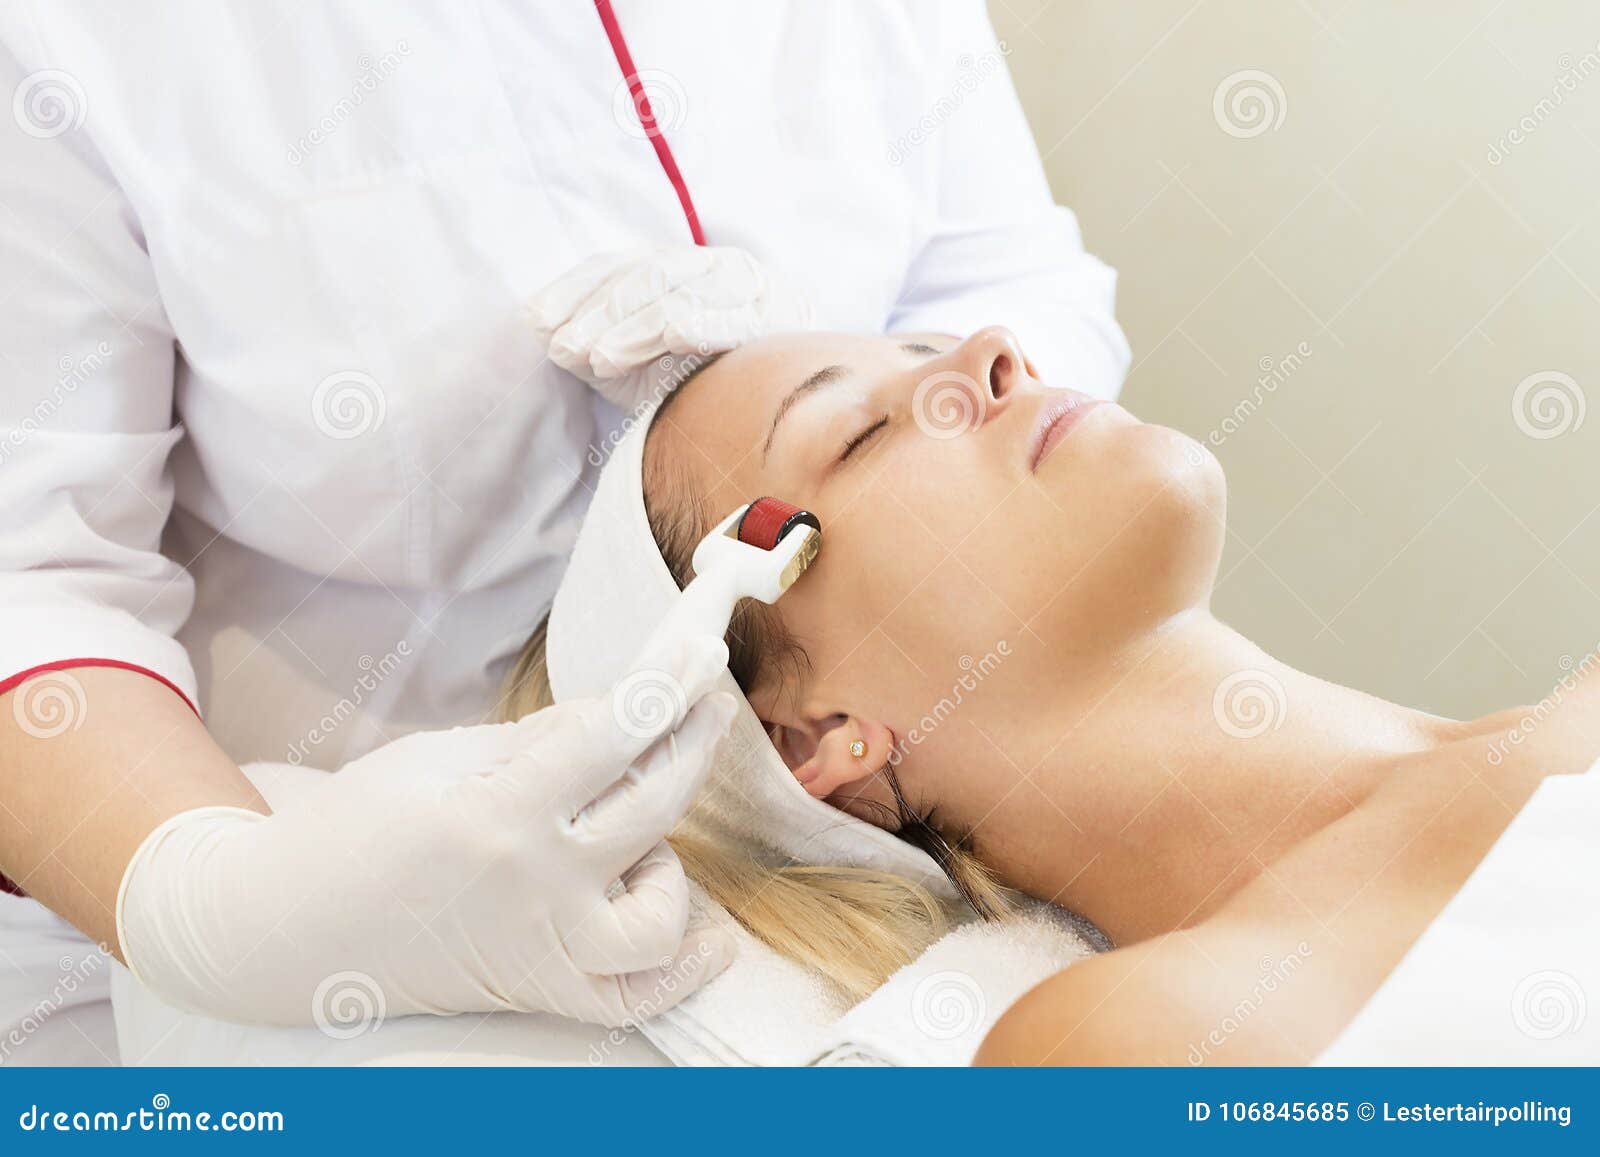 woman undergoes the procedure of medical micro needle therapy with a modern medical instrument derma roller.